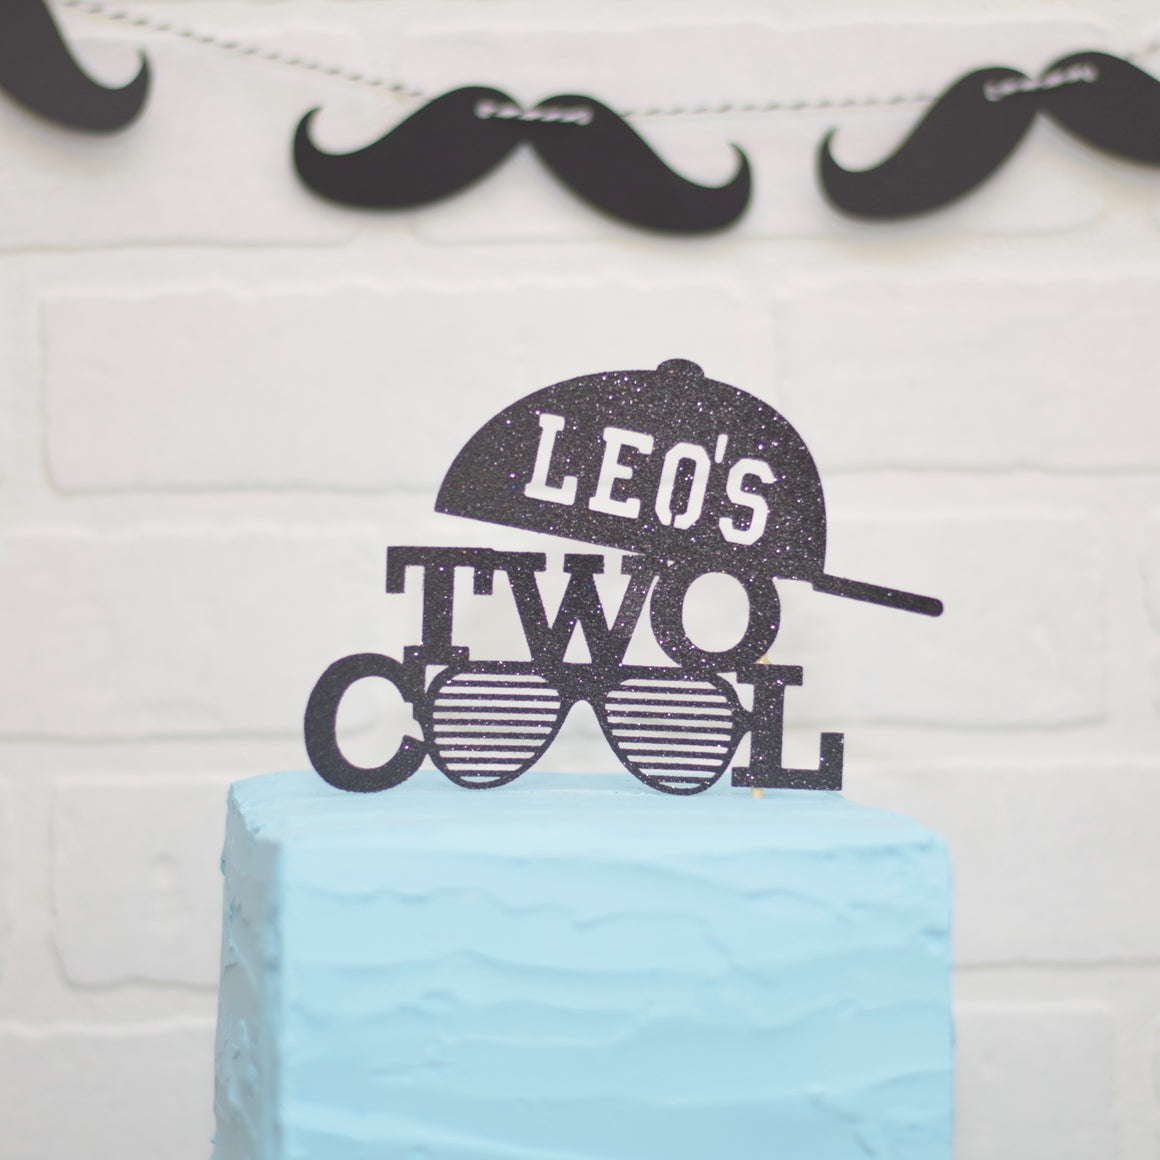 Leo's Two Cool Cake Topper with sunglasses and a hat. Second birthday cake topper